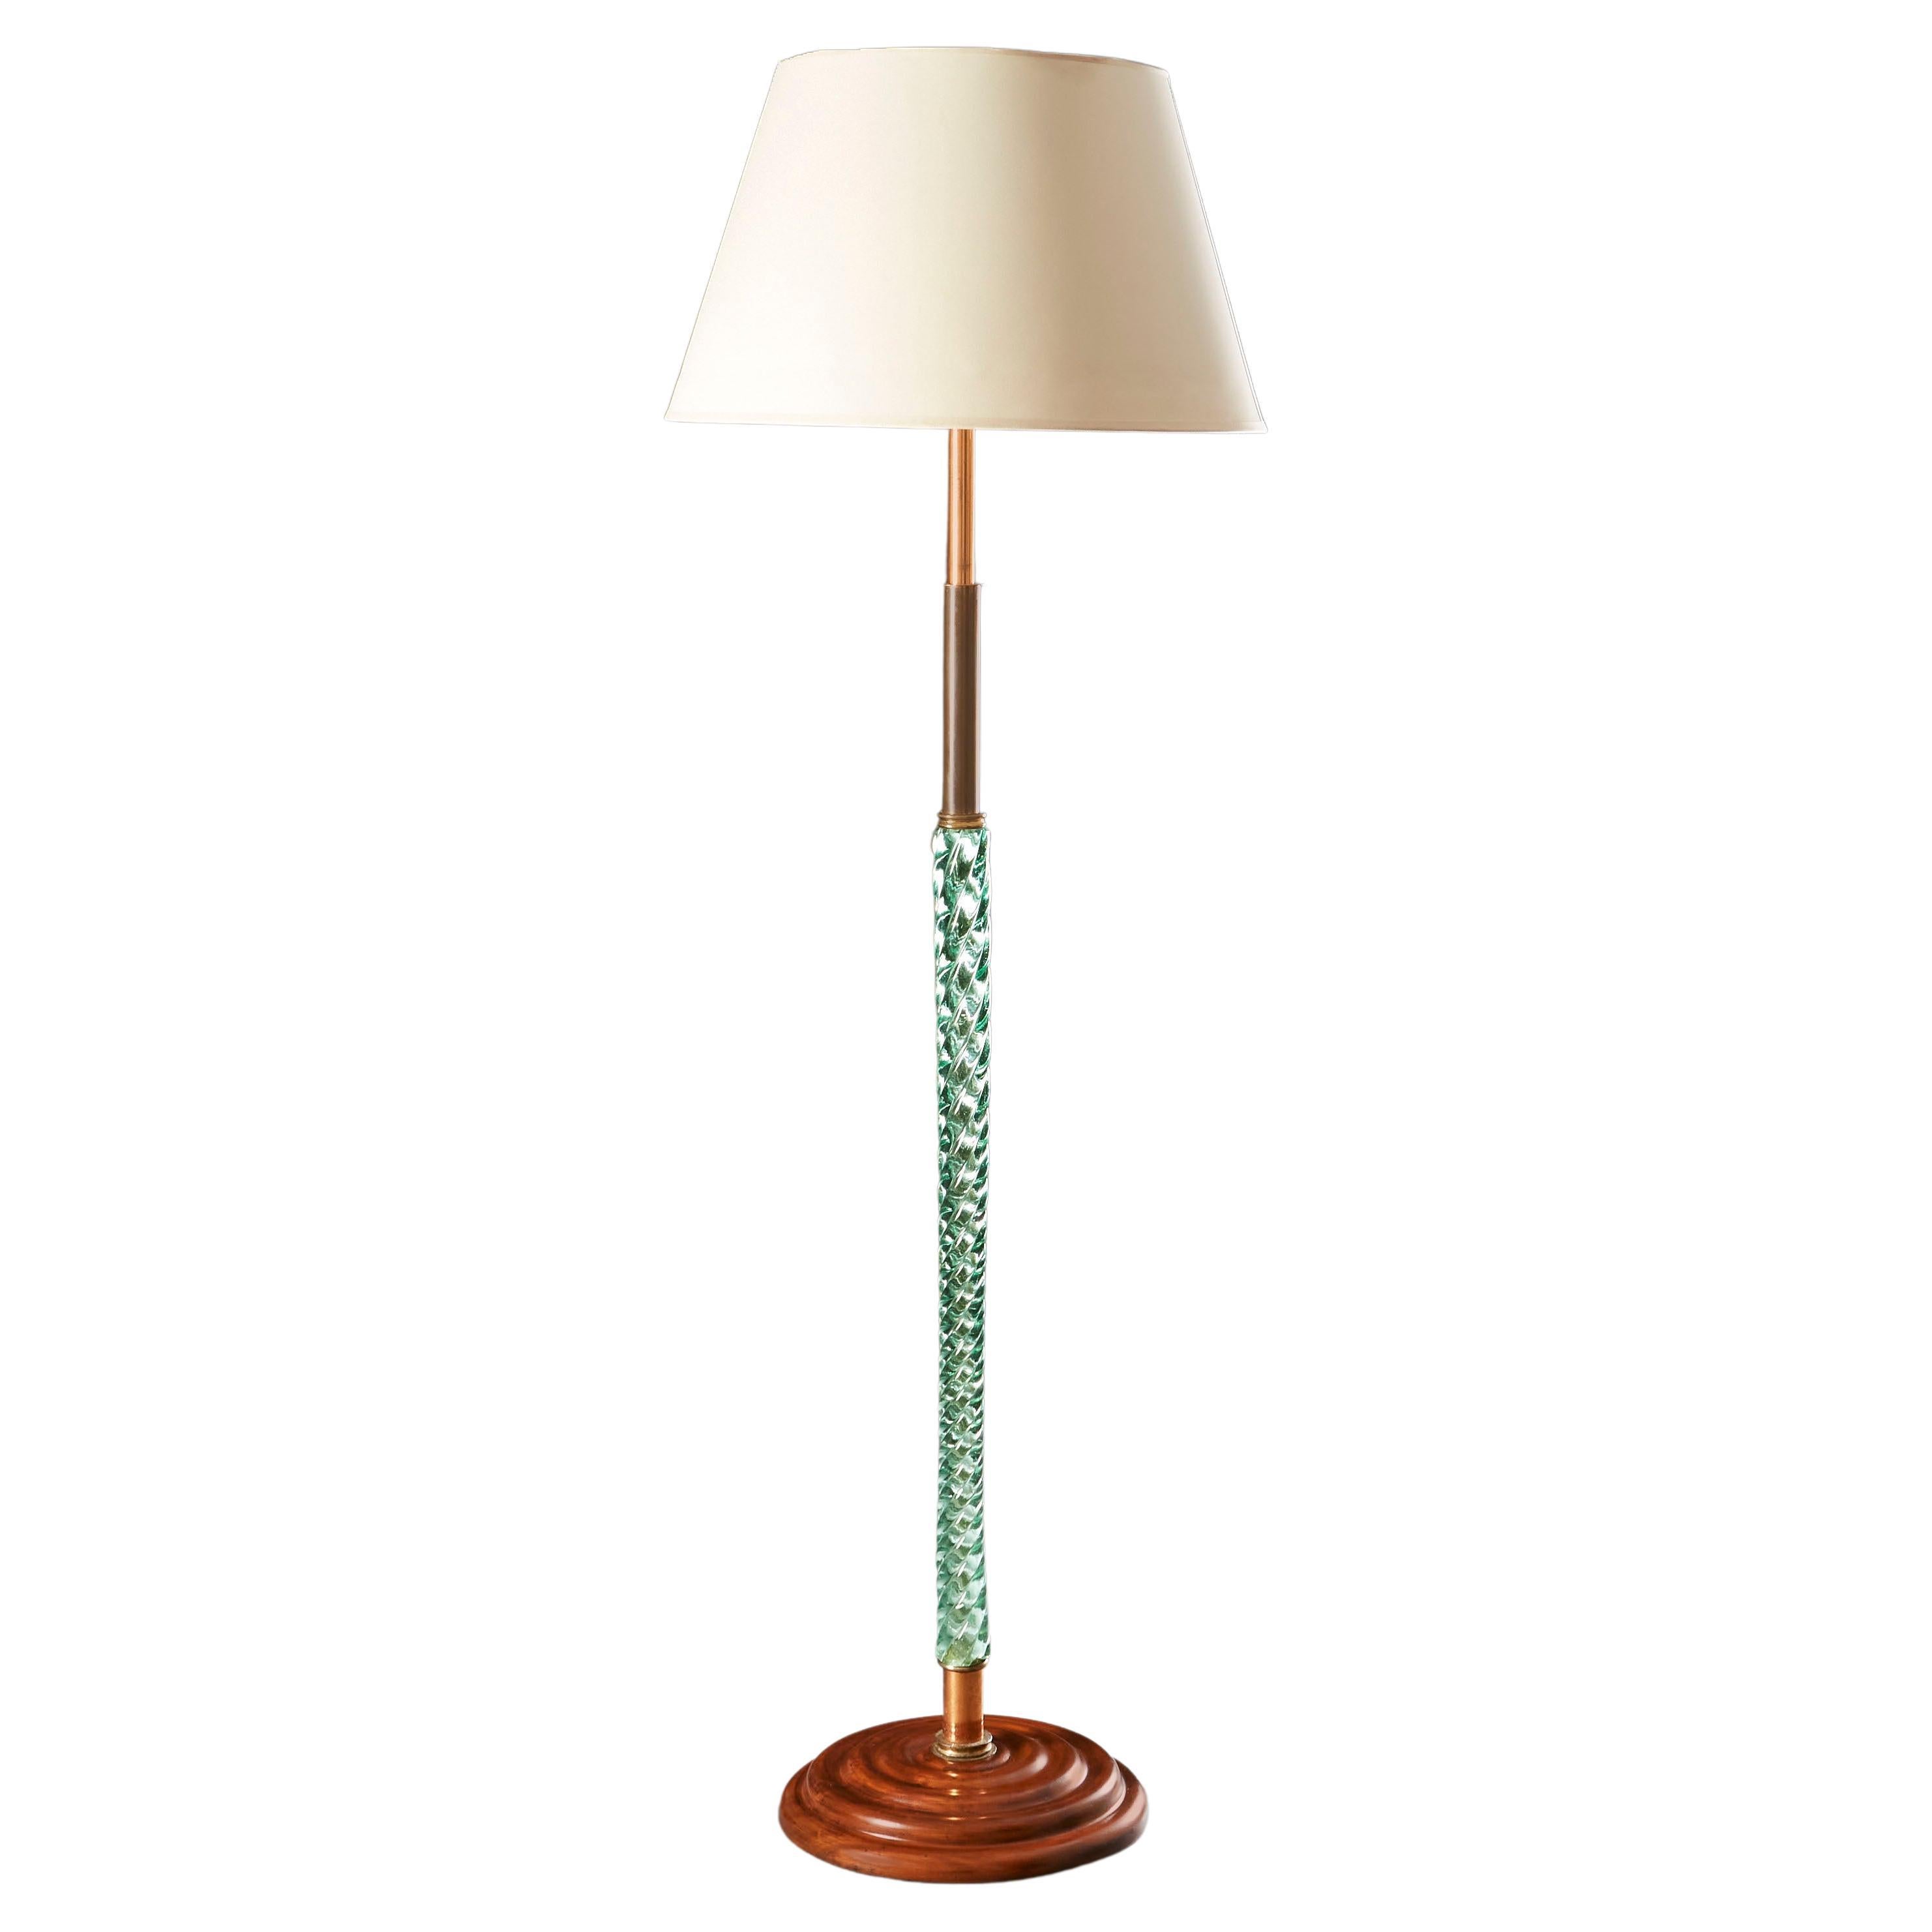 1930s Glass and Copper Standard Lamp After Venini